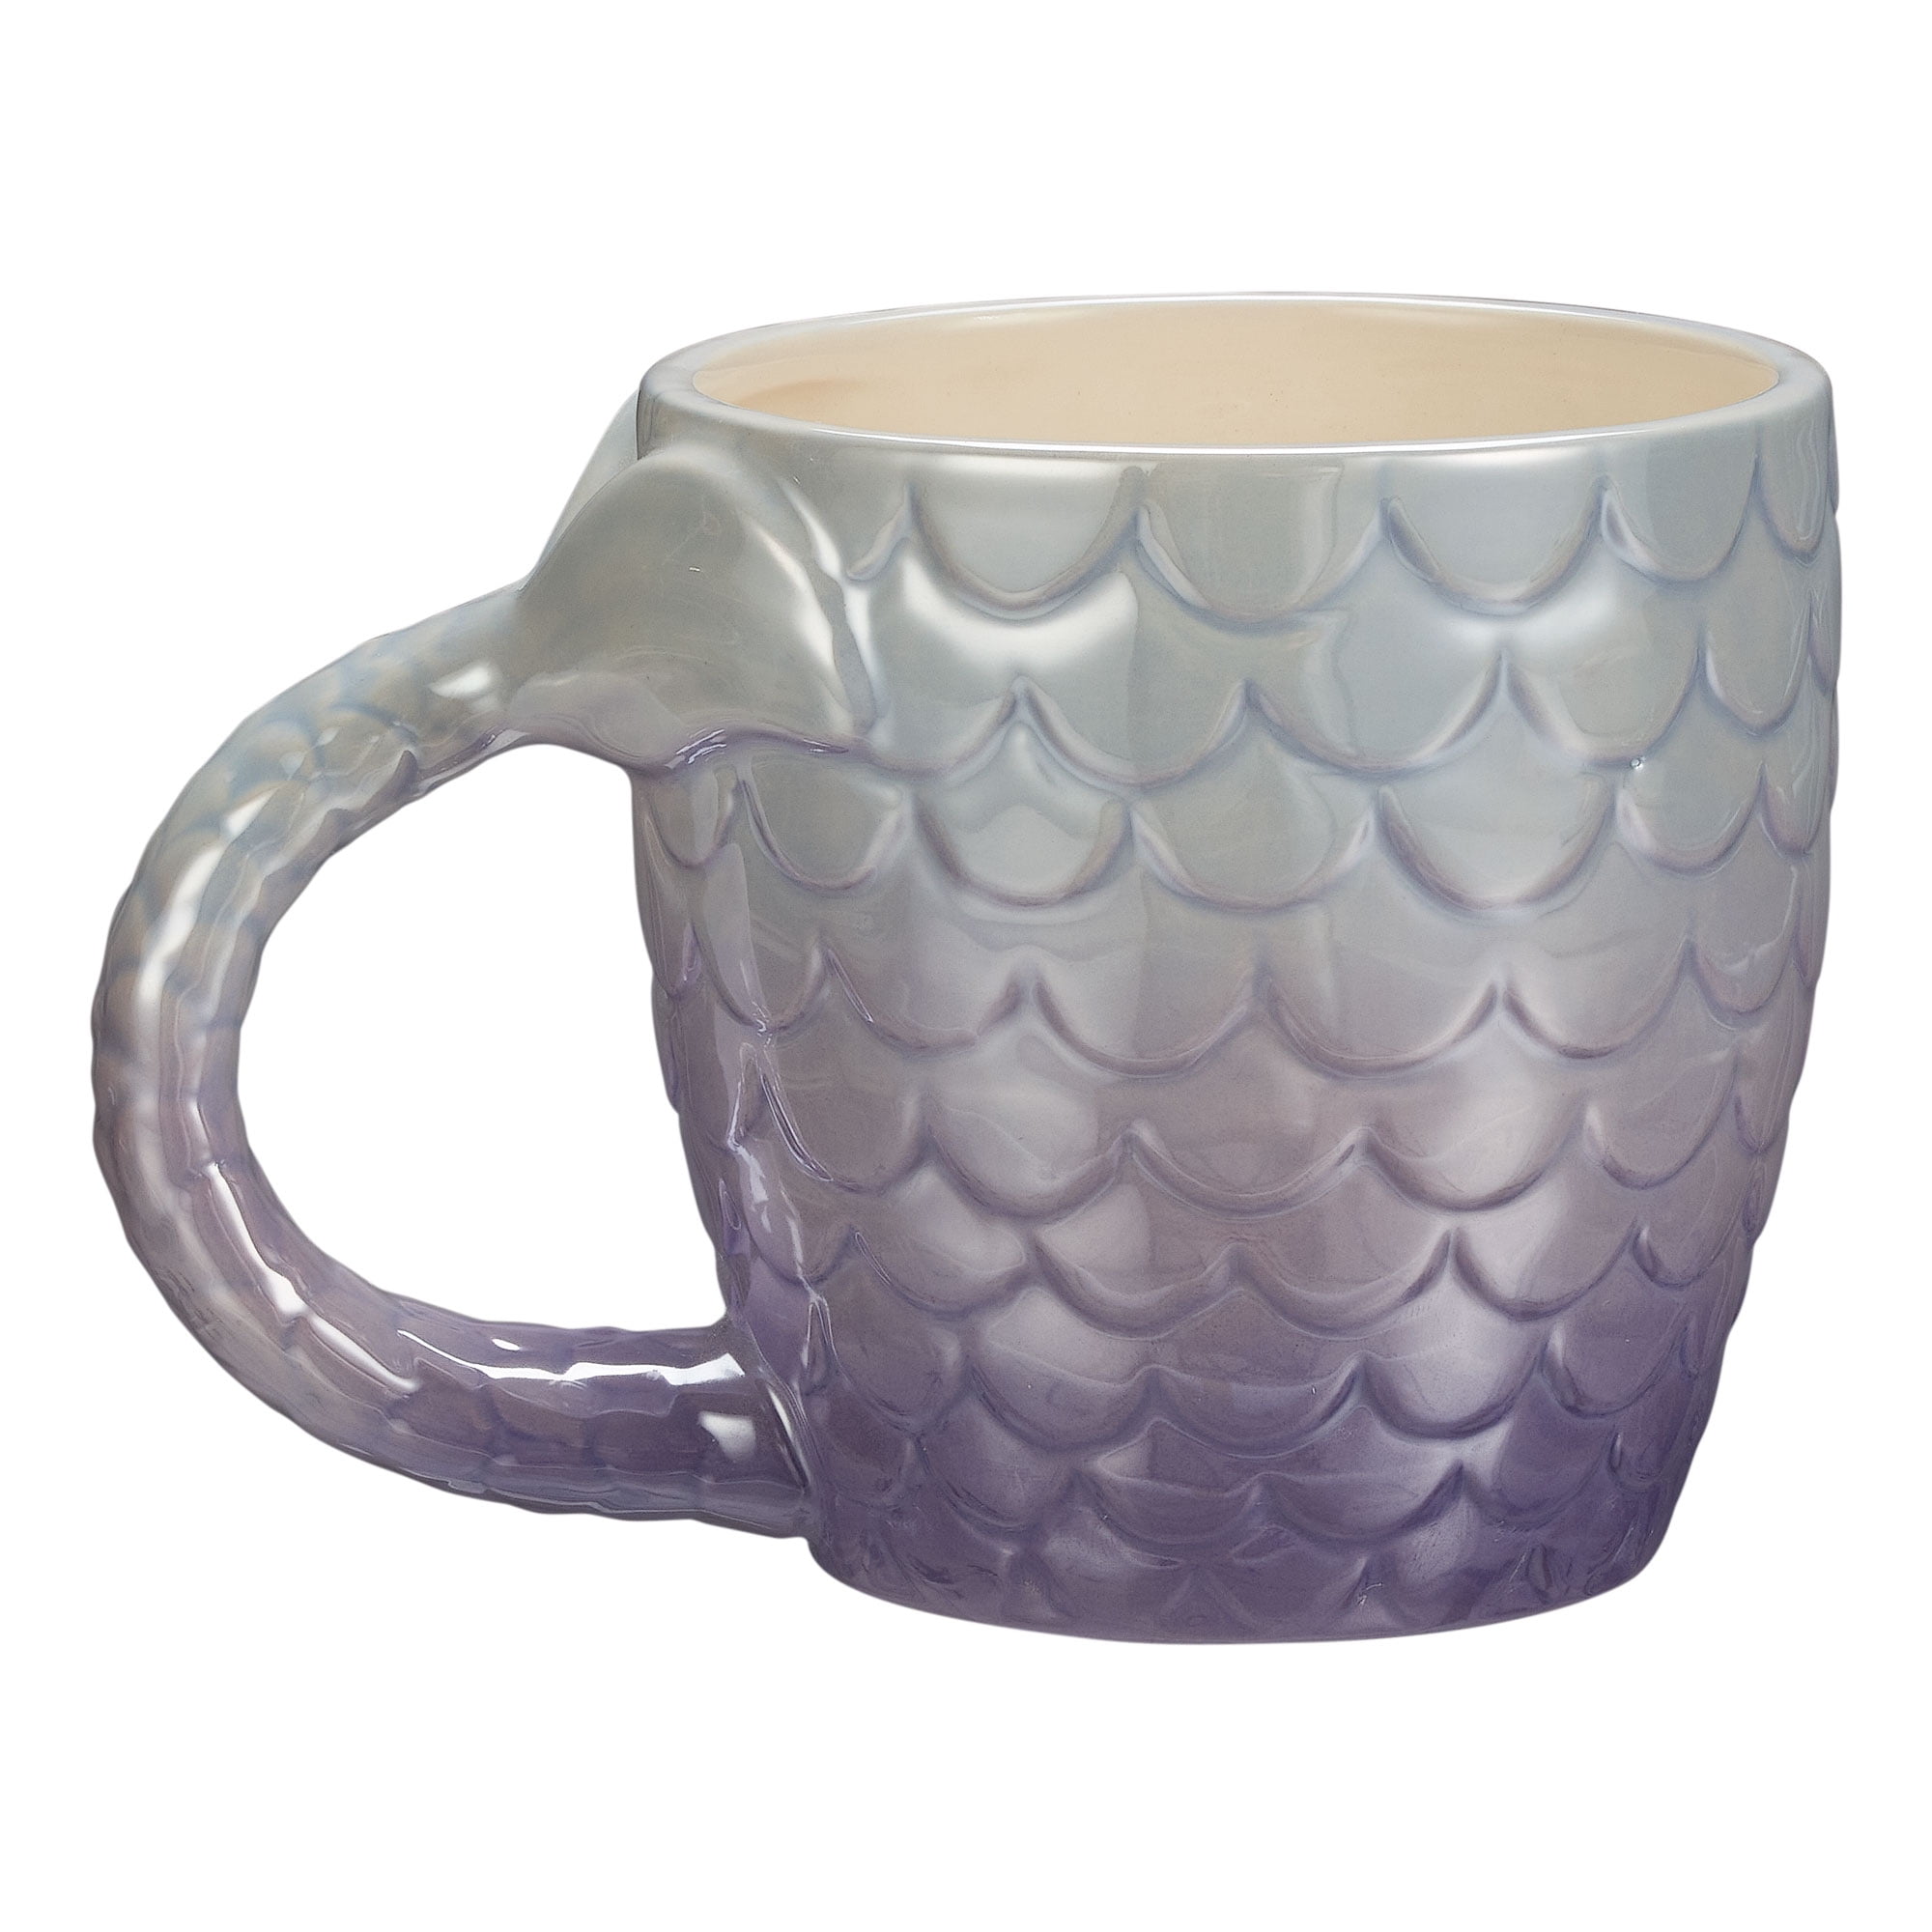 ThisWear Mermaid Gifts Colorful Mermaid Cups Dragon Scale Mugs Cool 11  ounce 2 Pack Coffee Mugs Purple & Teal 